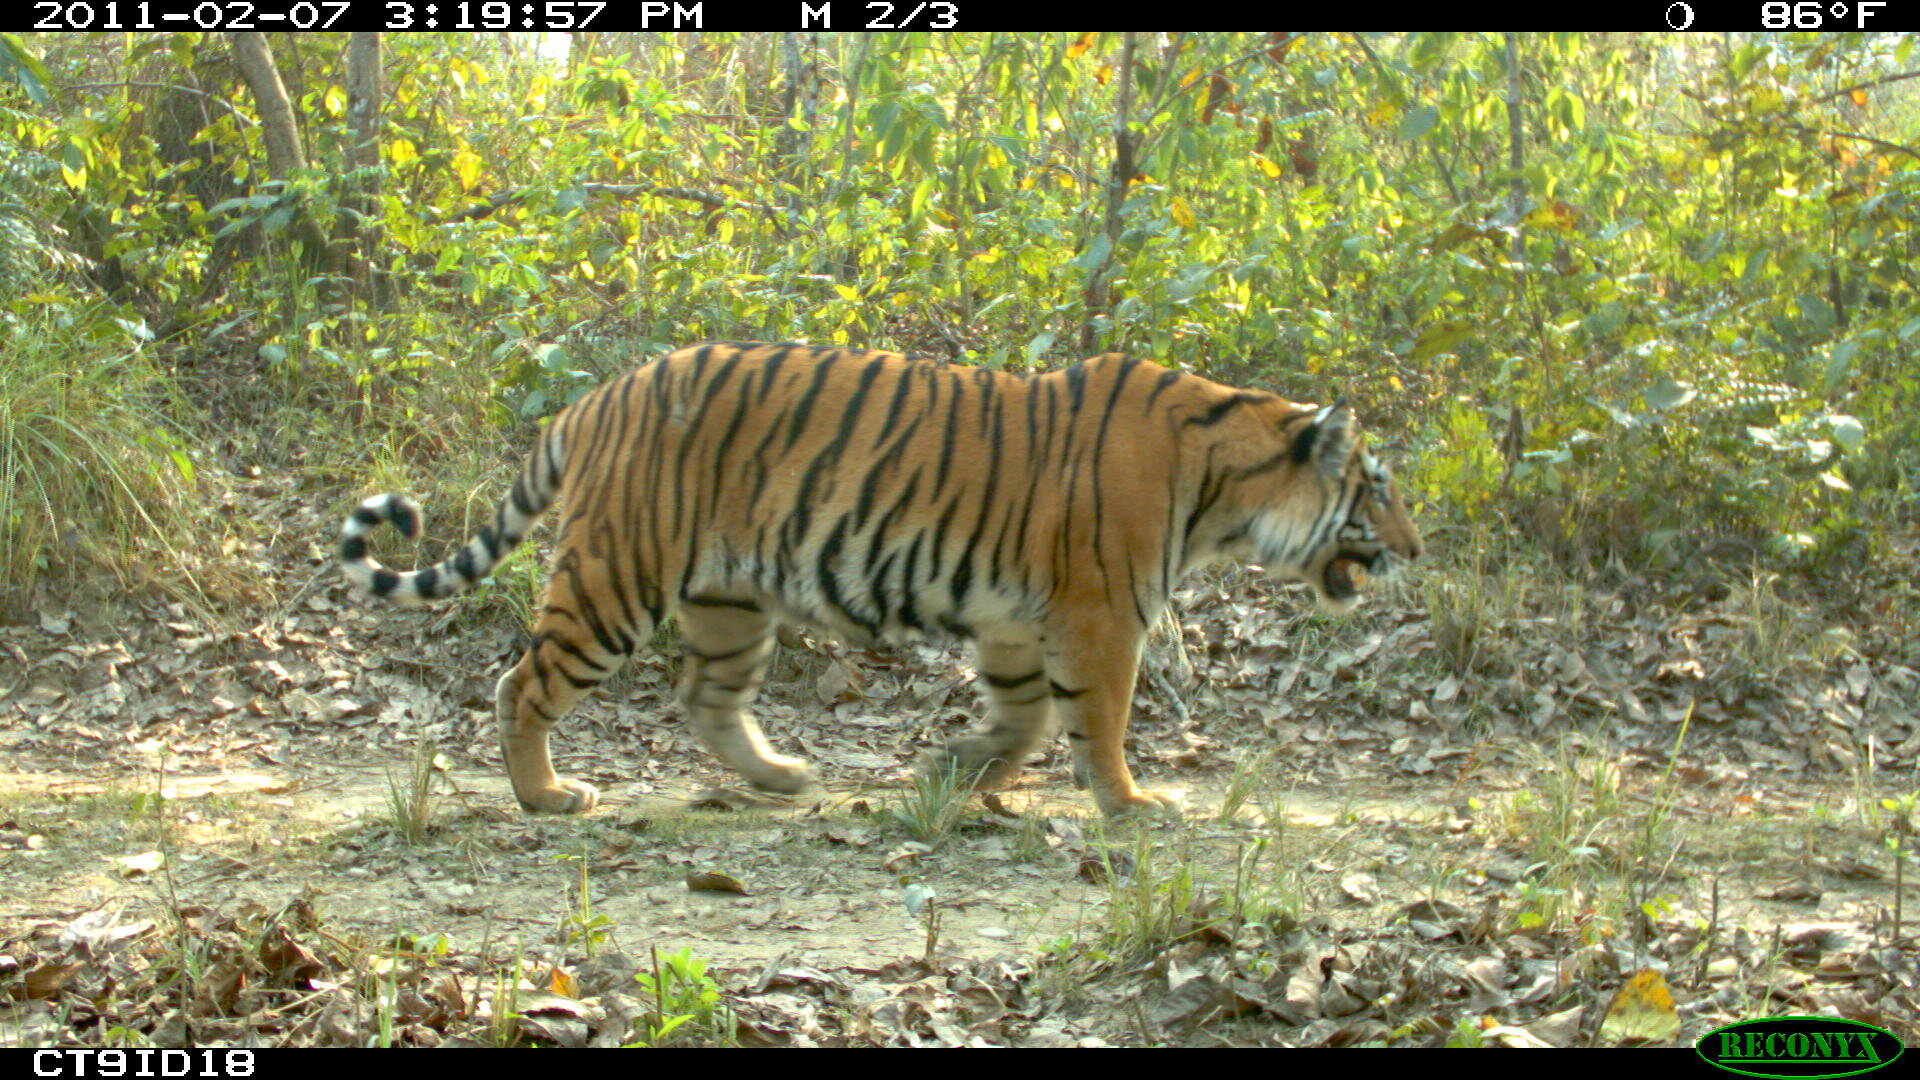 Thousands of miles of planned Asian roads threaten the heart of tiger habitat